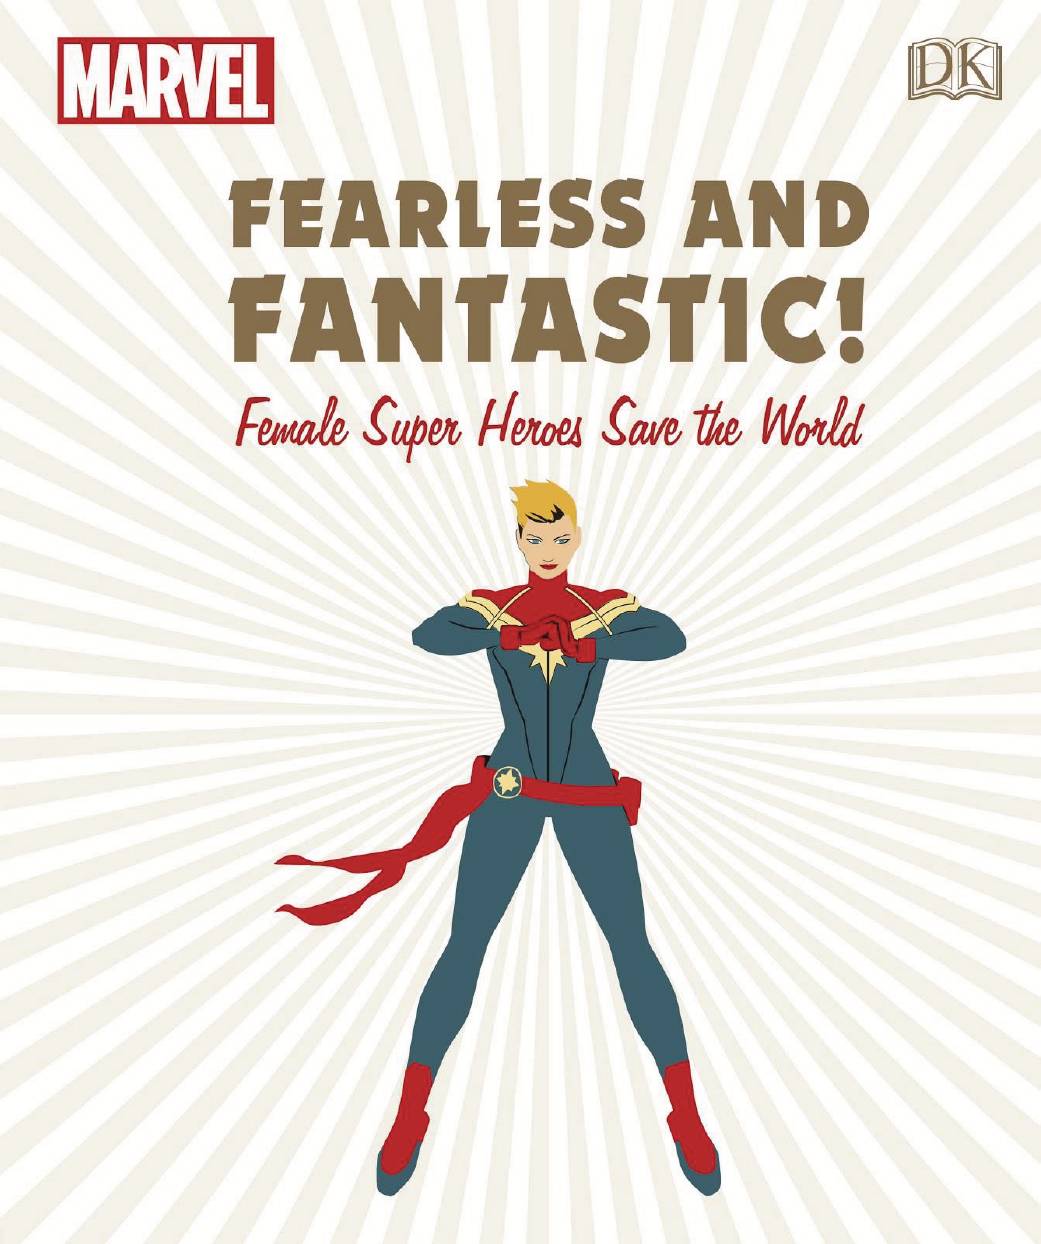 Marvel Fearless & Fantastic Female Super Heroes Save The World